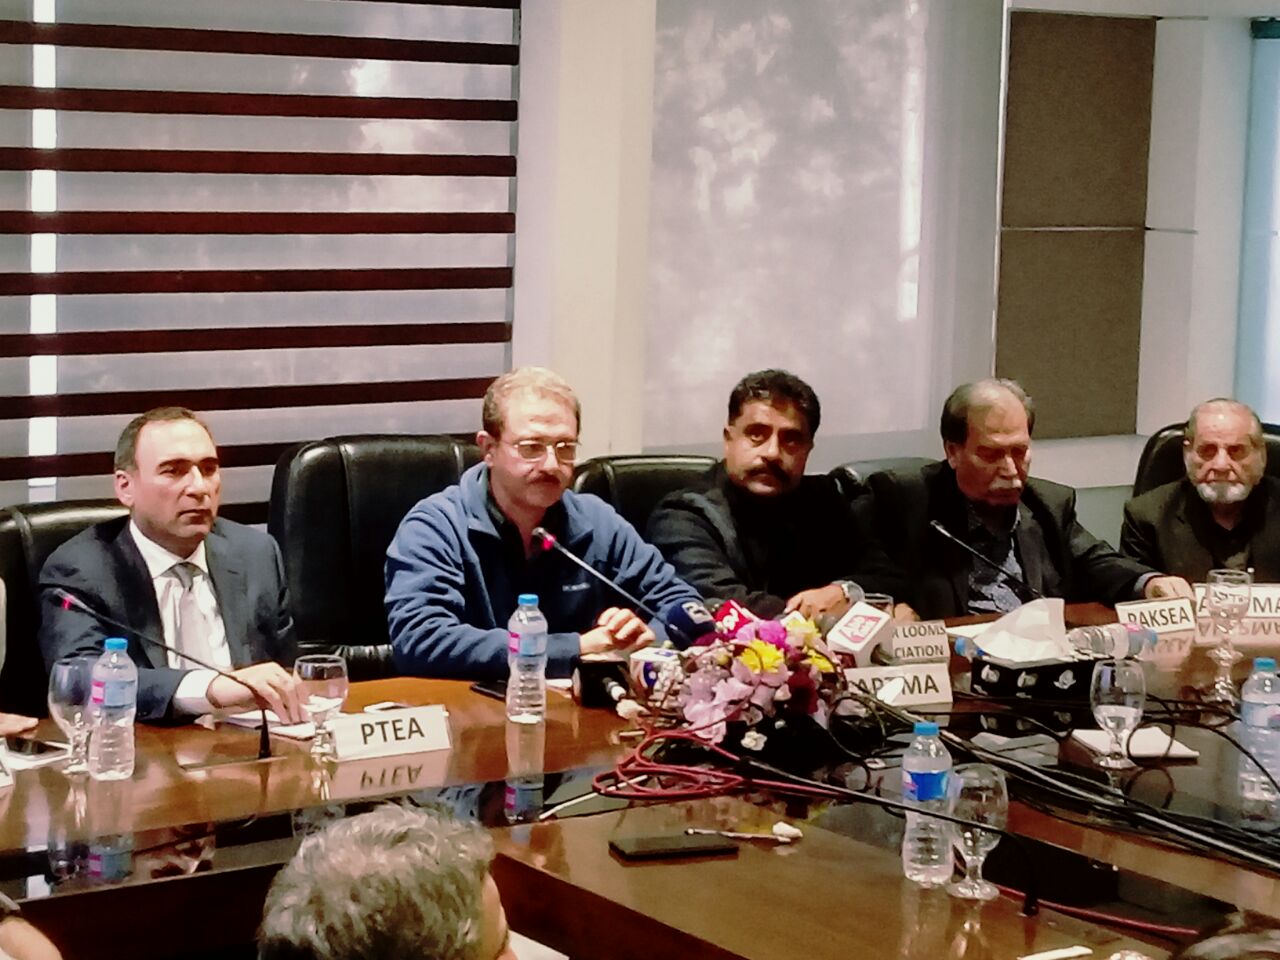 https://aptma.org.pk/wp-content/uploads/2021/10/Joint-Meeting-of-the-Textile-Industry-Associations-69.jpg